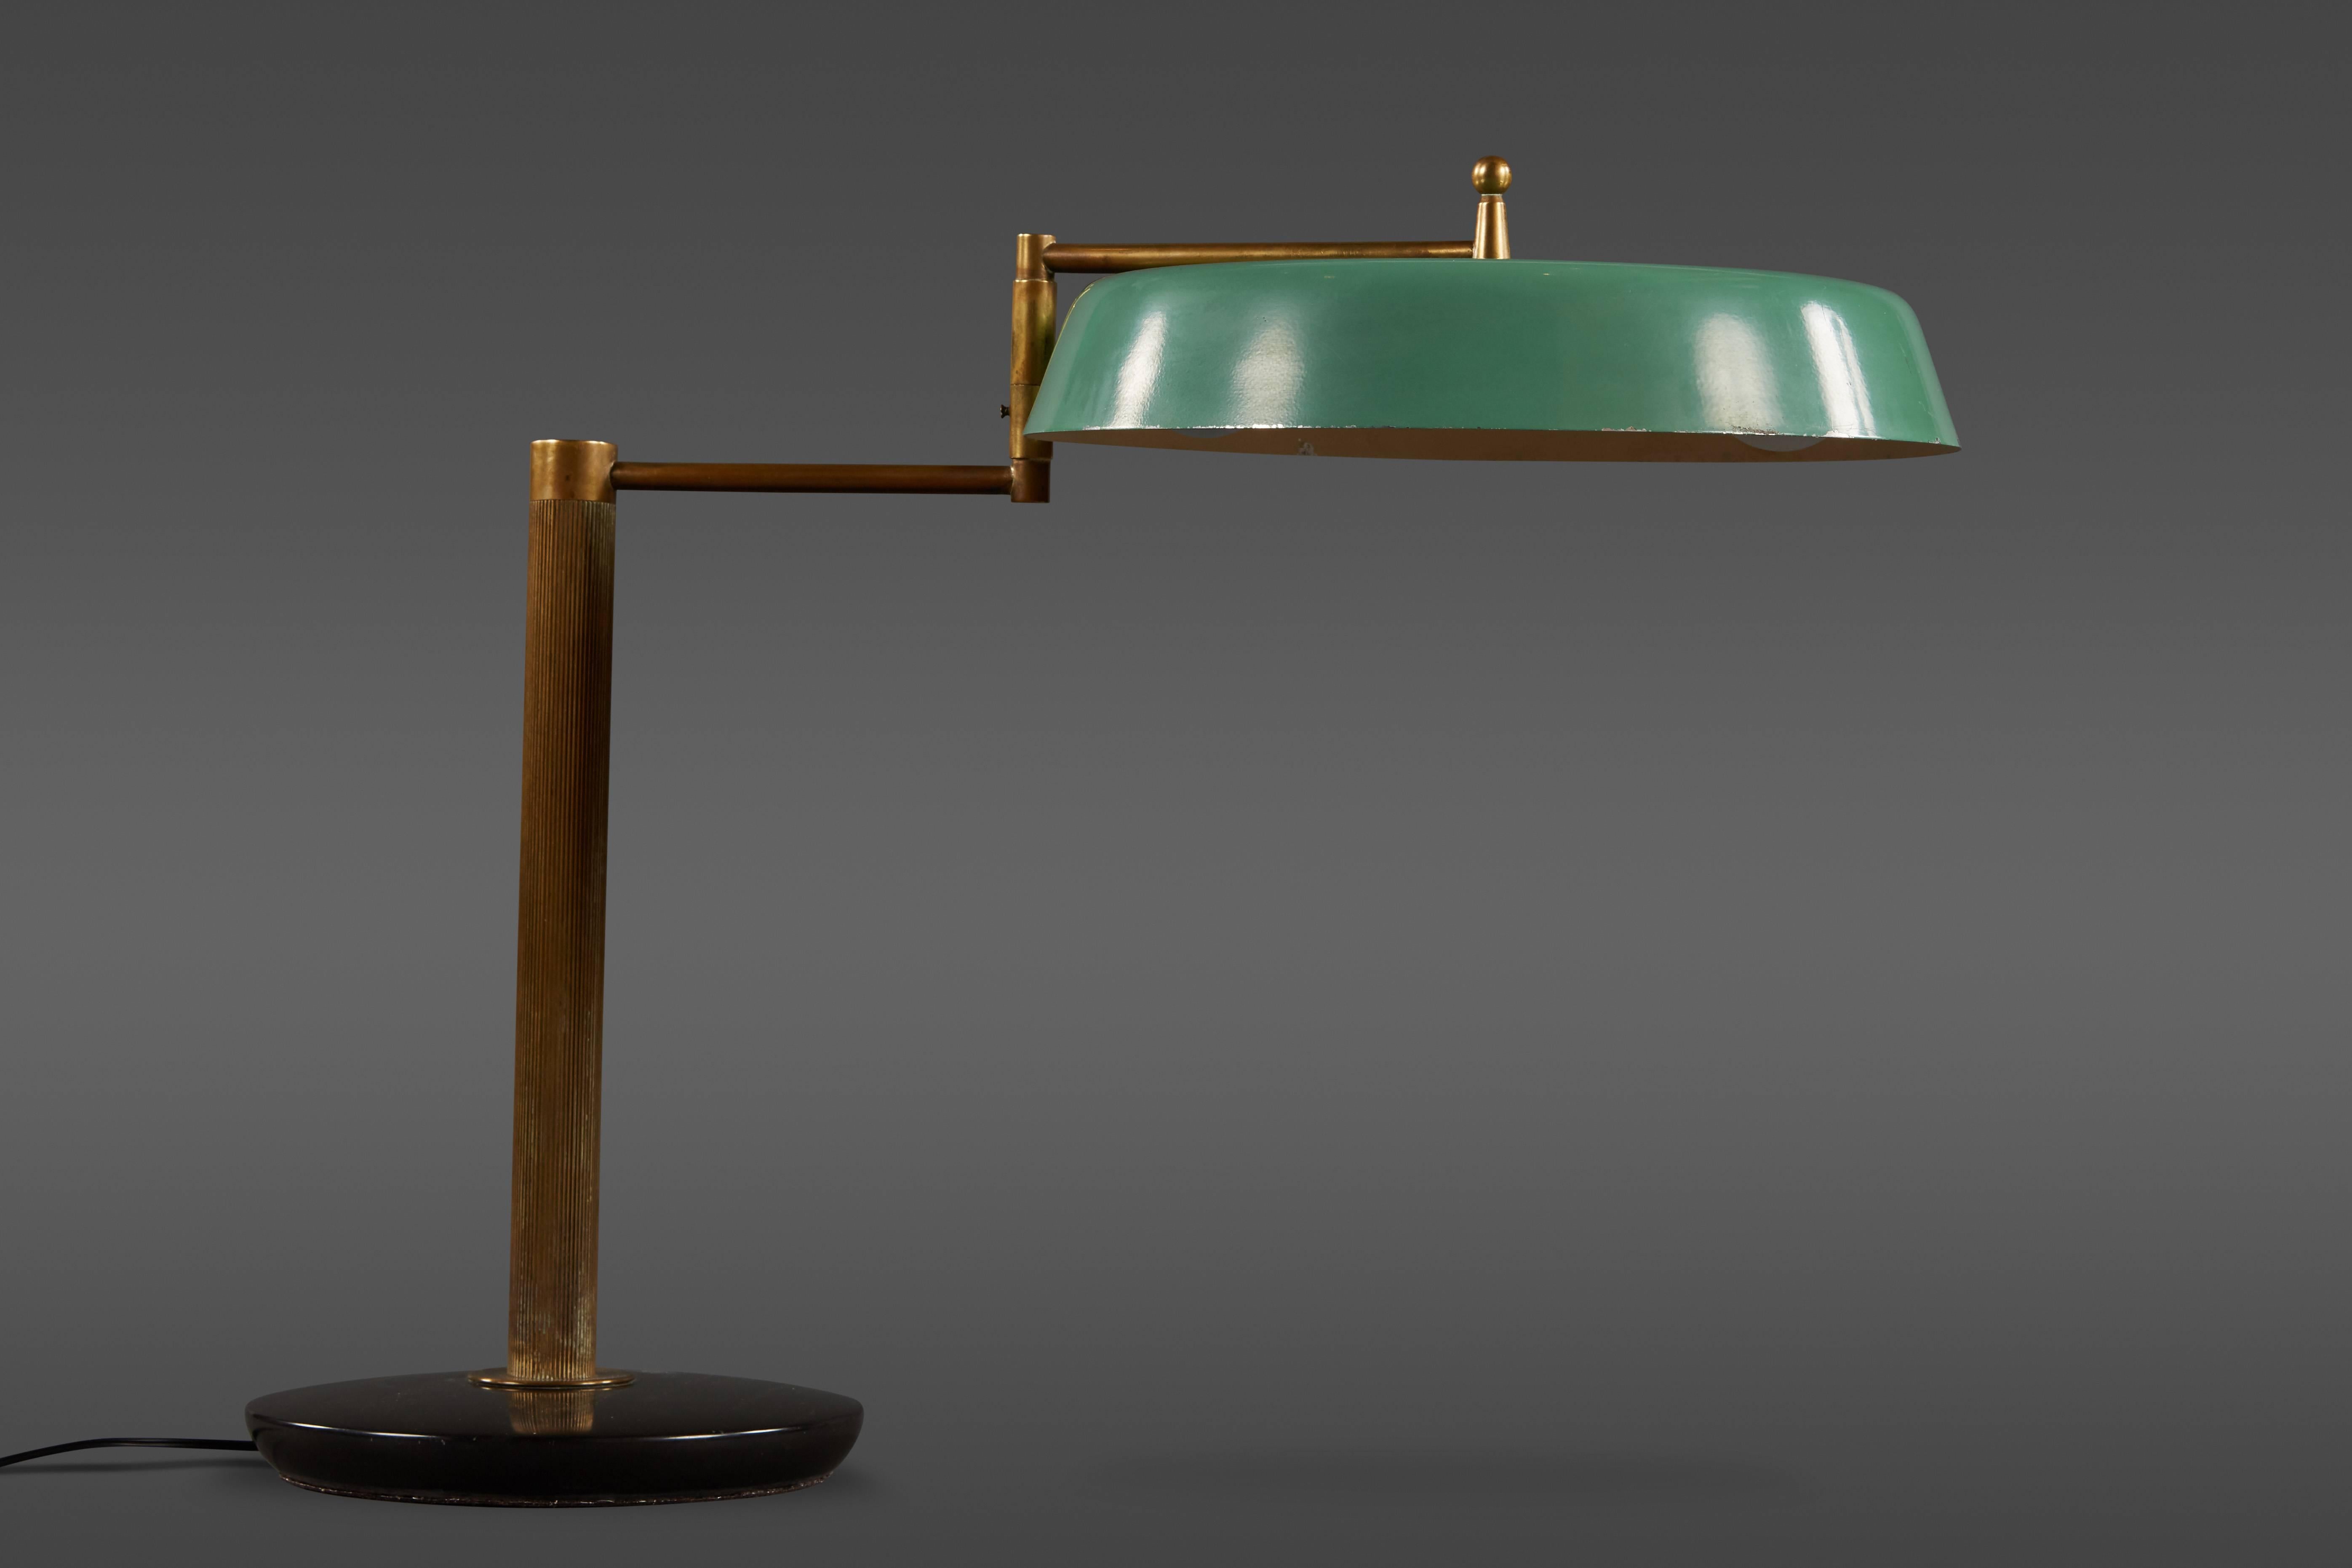 A handsome articulating Italian table lamp with green enameled shade, brass arm and brown enameled metal base.